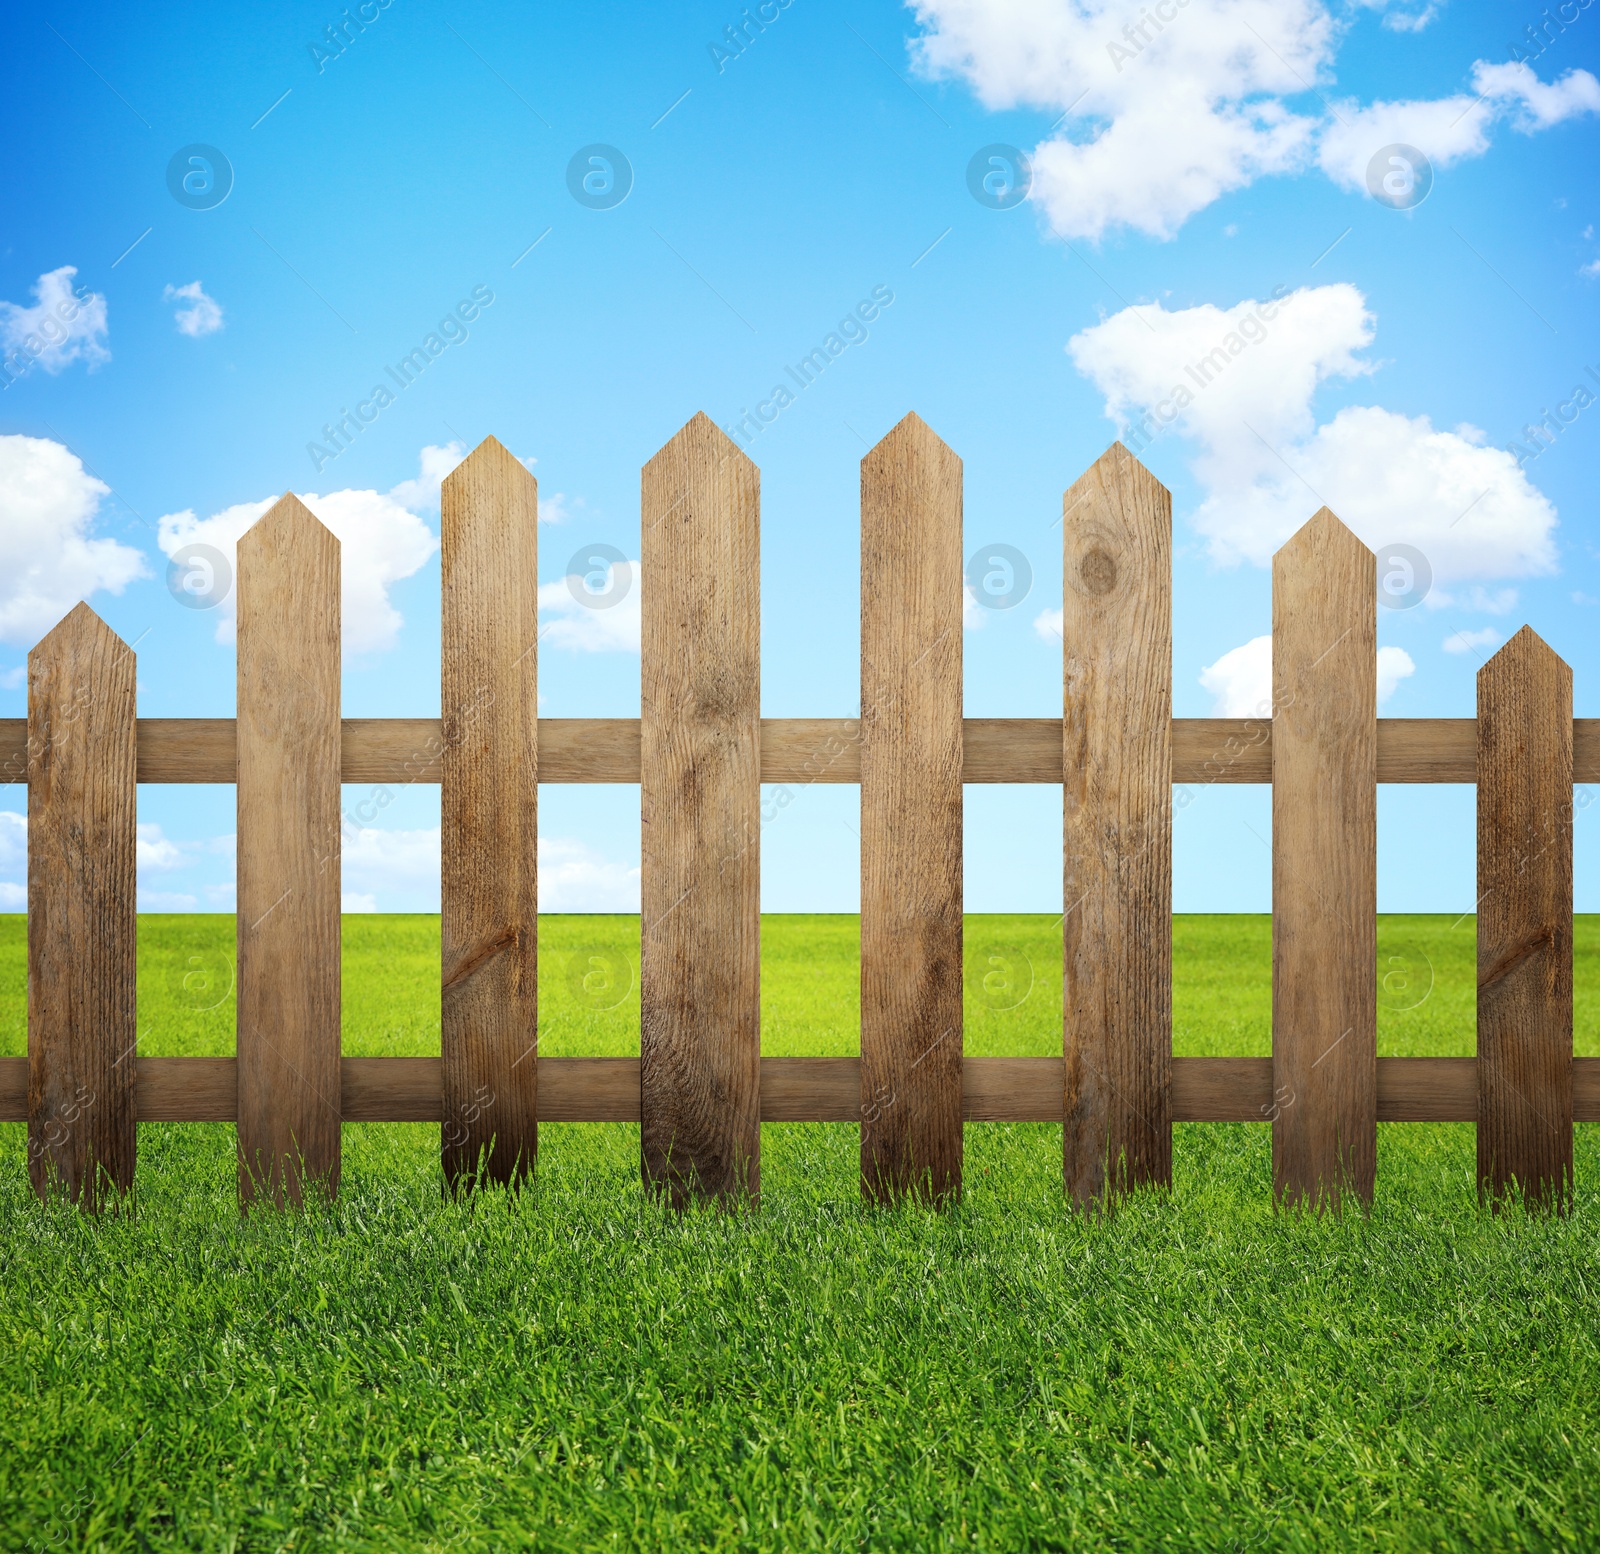 Image of Wooden fence and green grass under blue sky with clouds outdoors